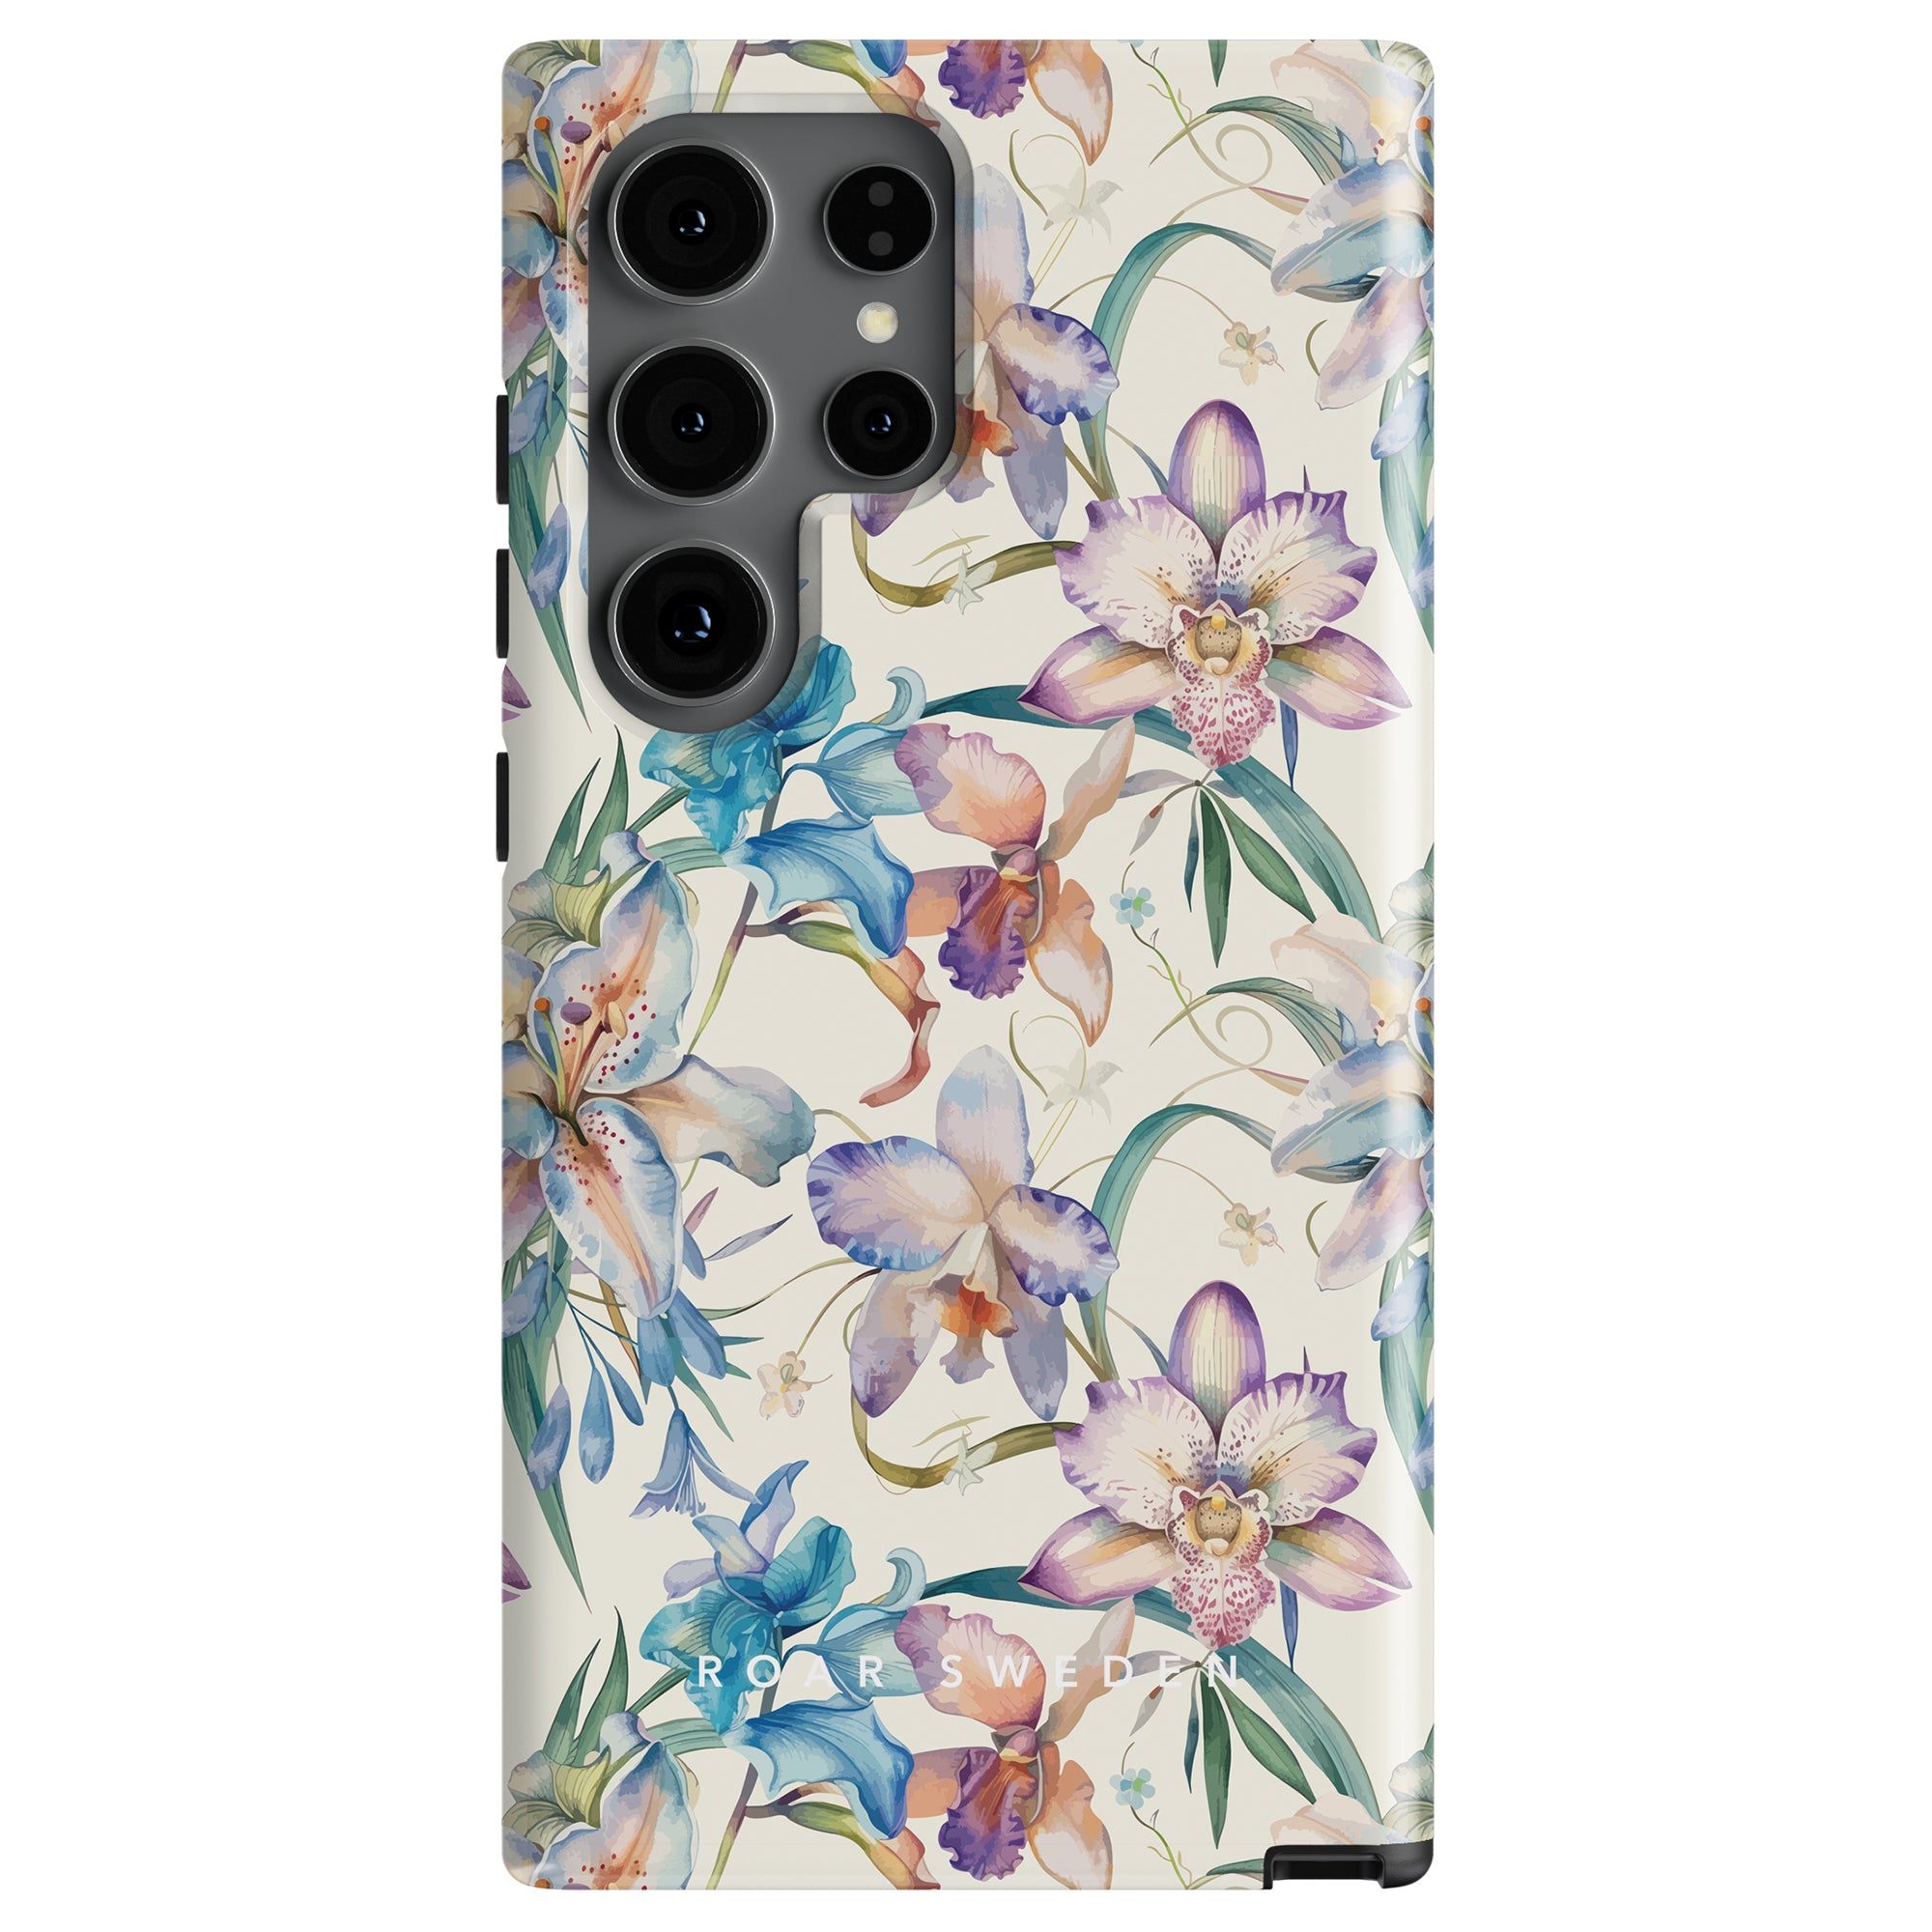 A part of our Summer Collection, this Bouquet - Tough Case showcases a stunning floral design with colorful flowers in shades of blue, purple, and pink. The Bouquet - Tough Case has multiple camera cutouts for the phone's lenses.